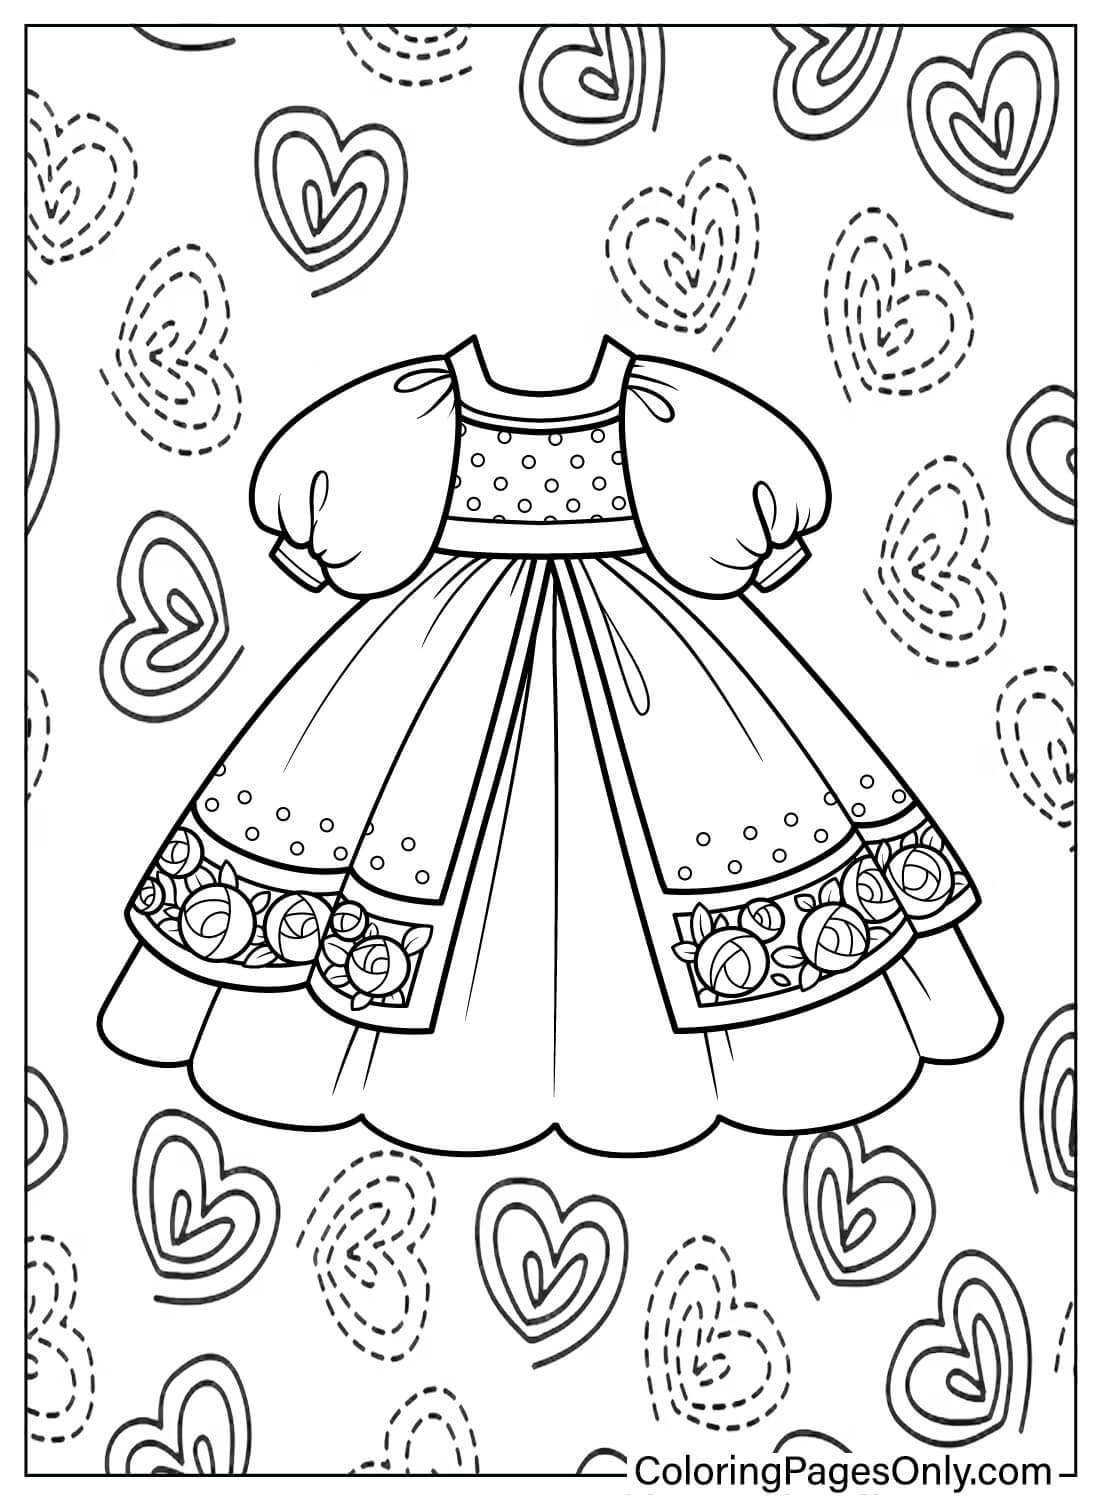 Beautiful Baby Dress Coloring Page - Free Printable Coloring Pages